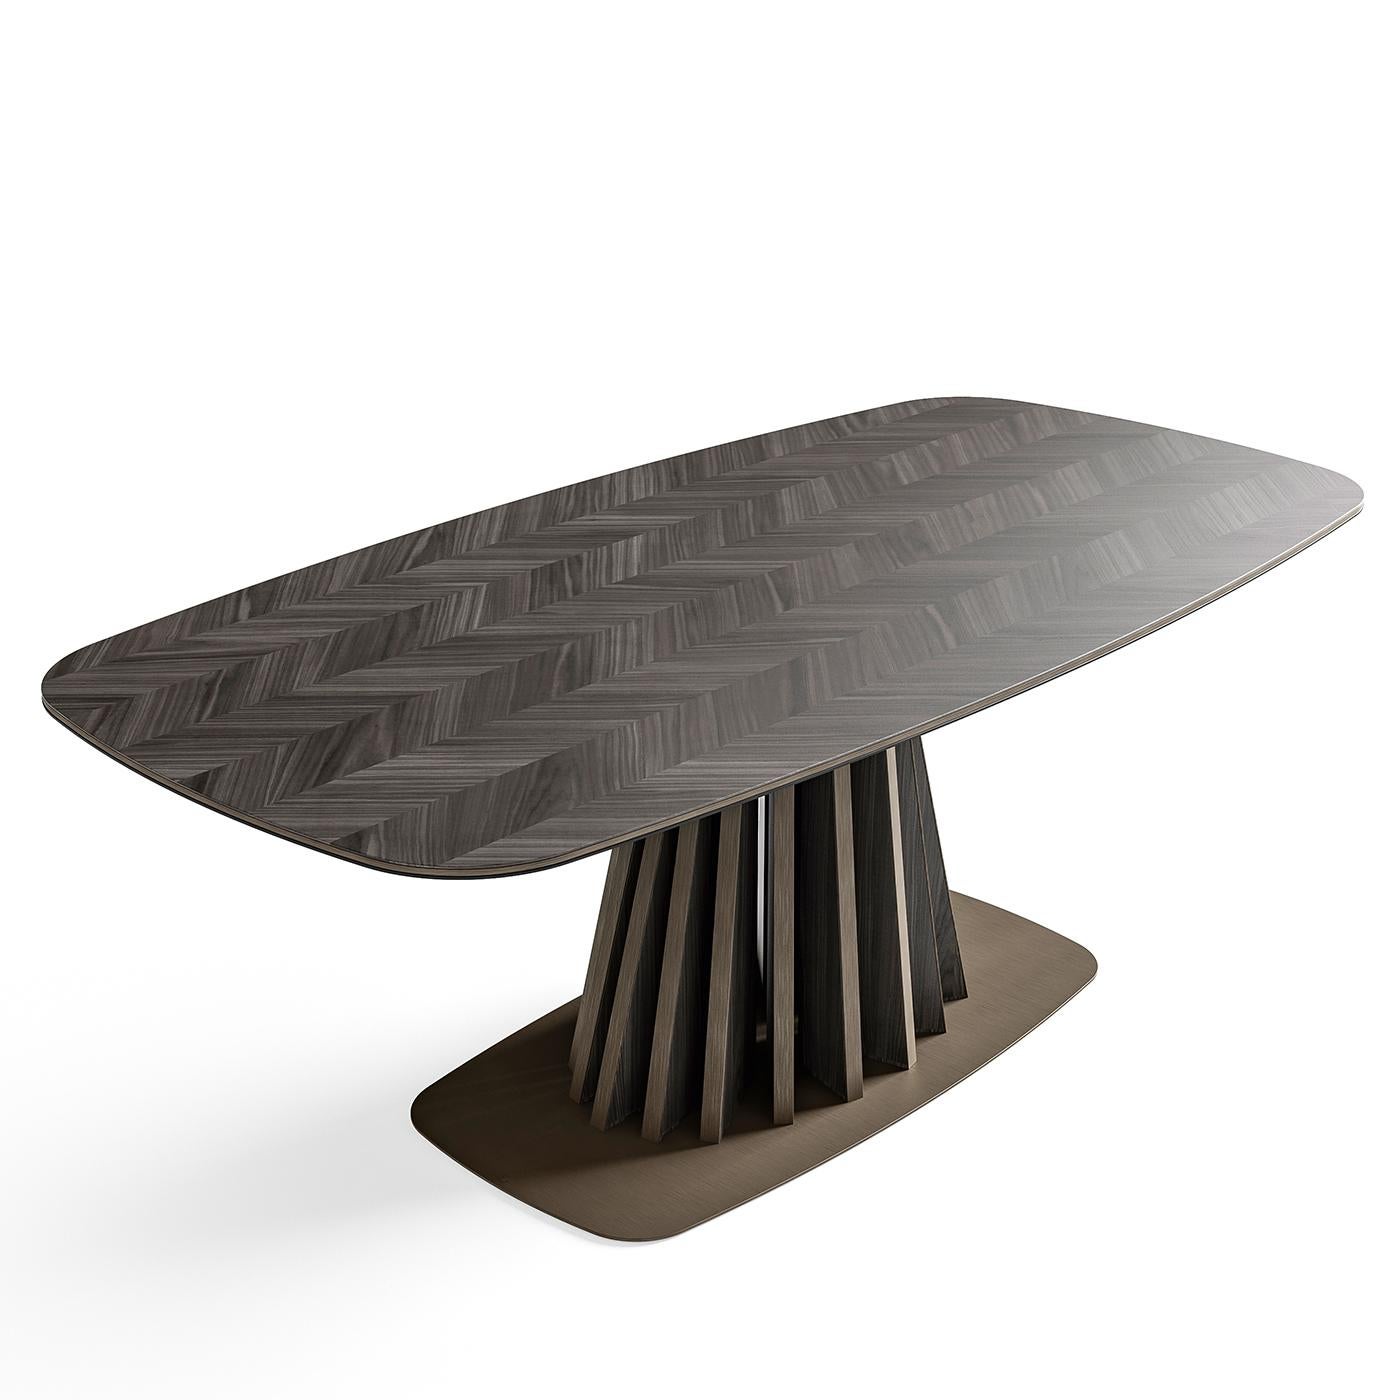 Chic, organic influences shape the inlaid dining table. On a tree-shaped base in walnut wood - available in a dark or light stain - the table stands on a metal plate and is topped with wood veneer in a gorgeous Hungarian herringbone pattern. Top it